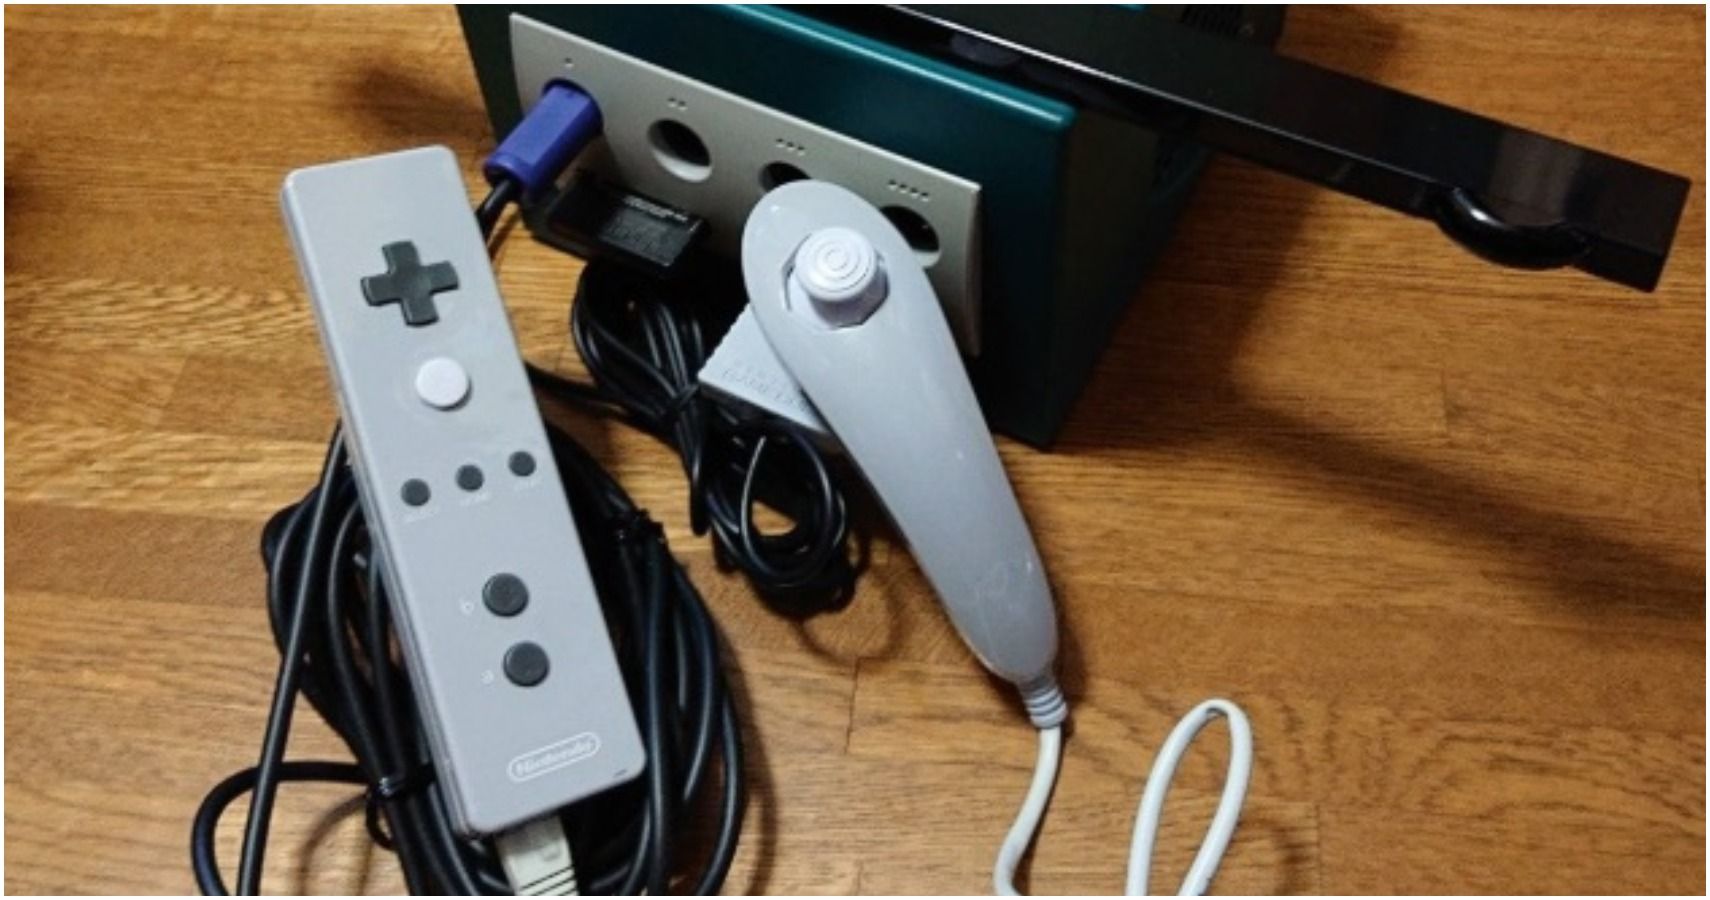 The Prototype Wiimote For The GameCube Has Surfaced Online